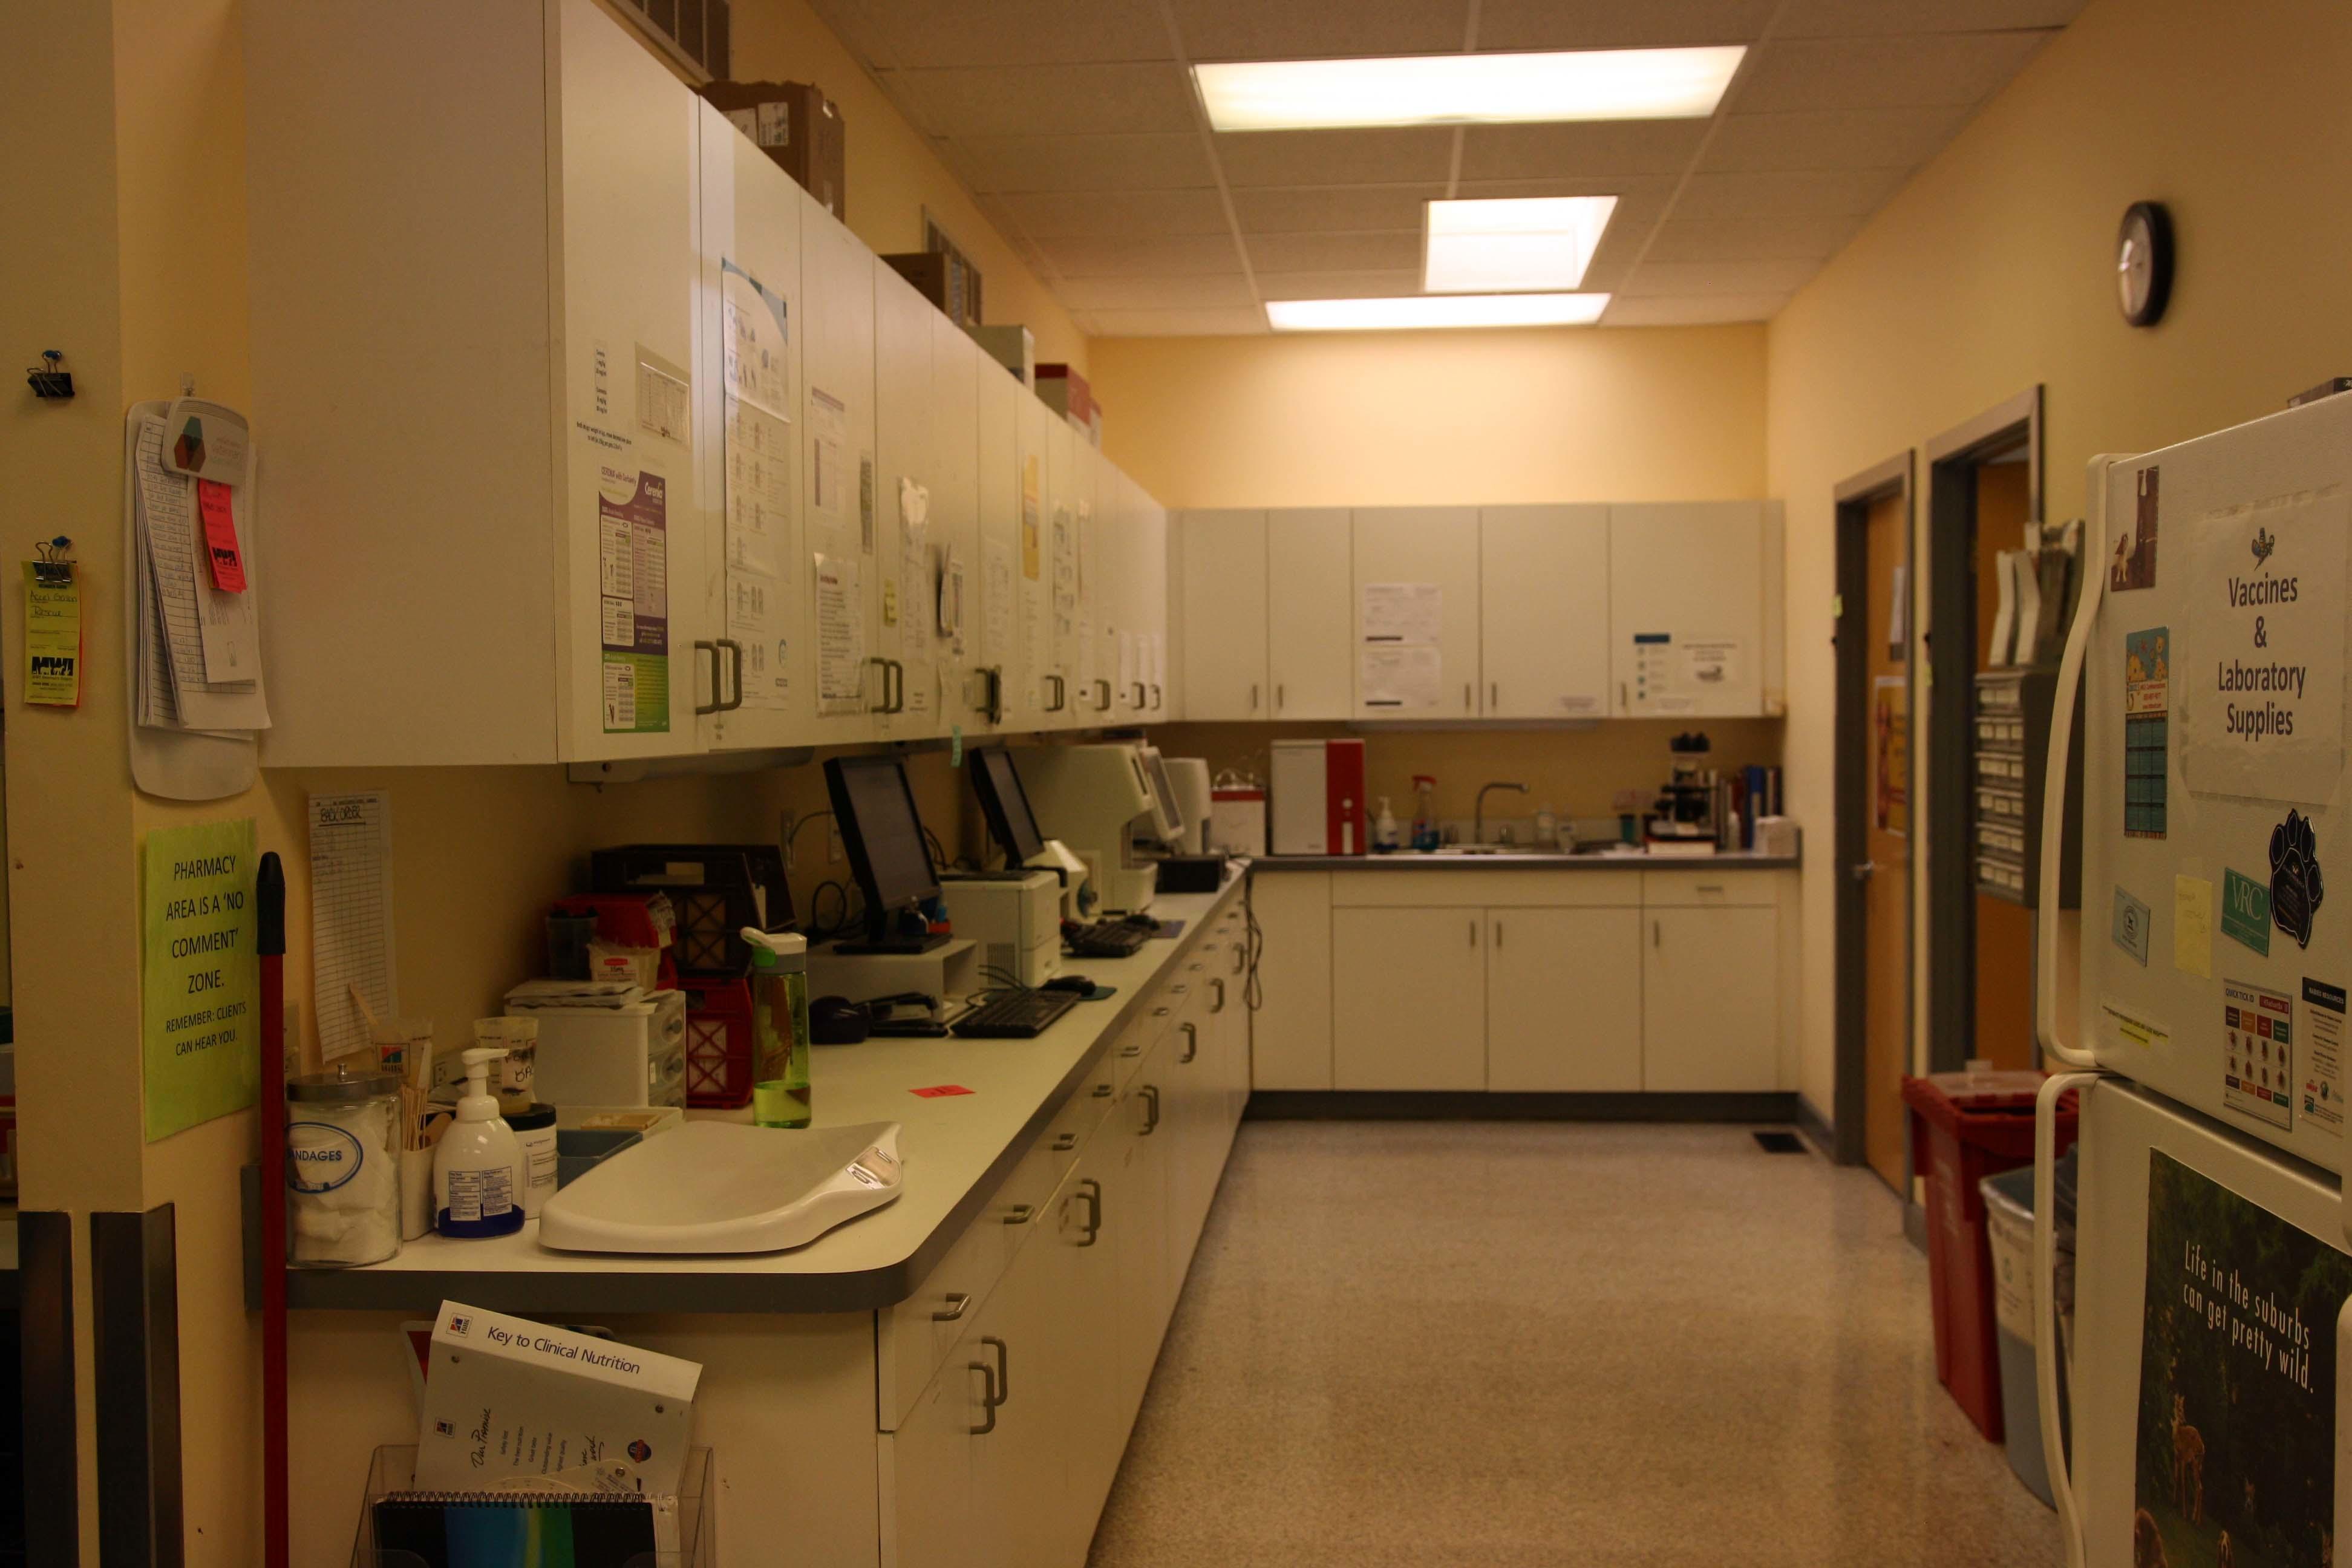 The backrooms of our clinic are always kept very clean and tidy to meet the standards of care your pet deserves.